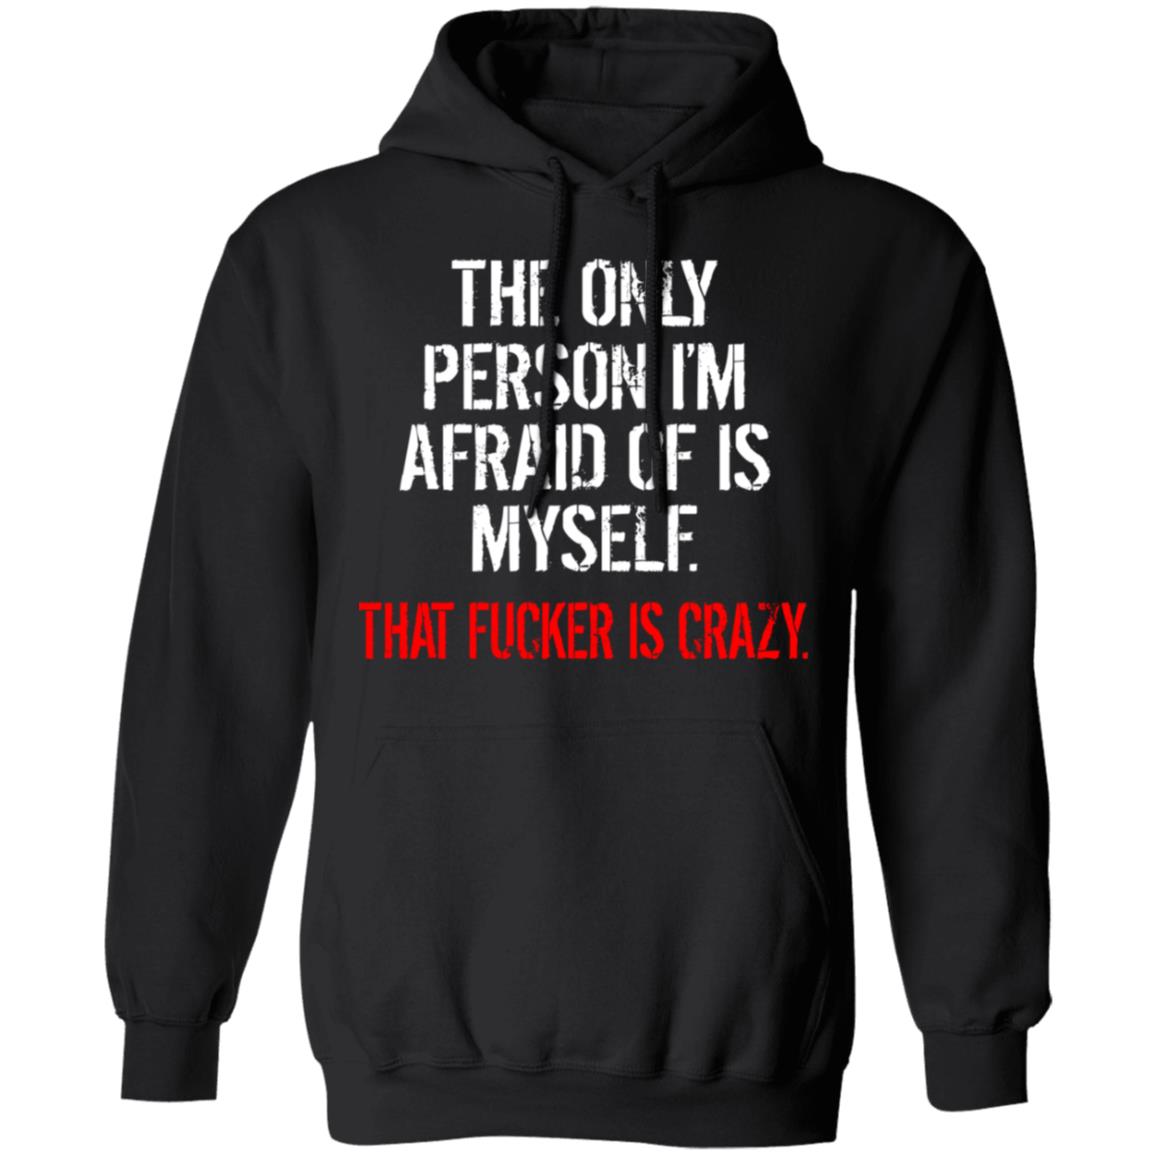 The Only Person I'm Afraid Of Is Myself Shirt | Allbluetees.com